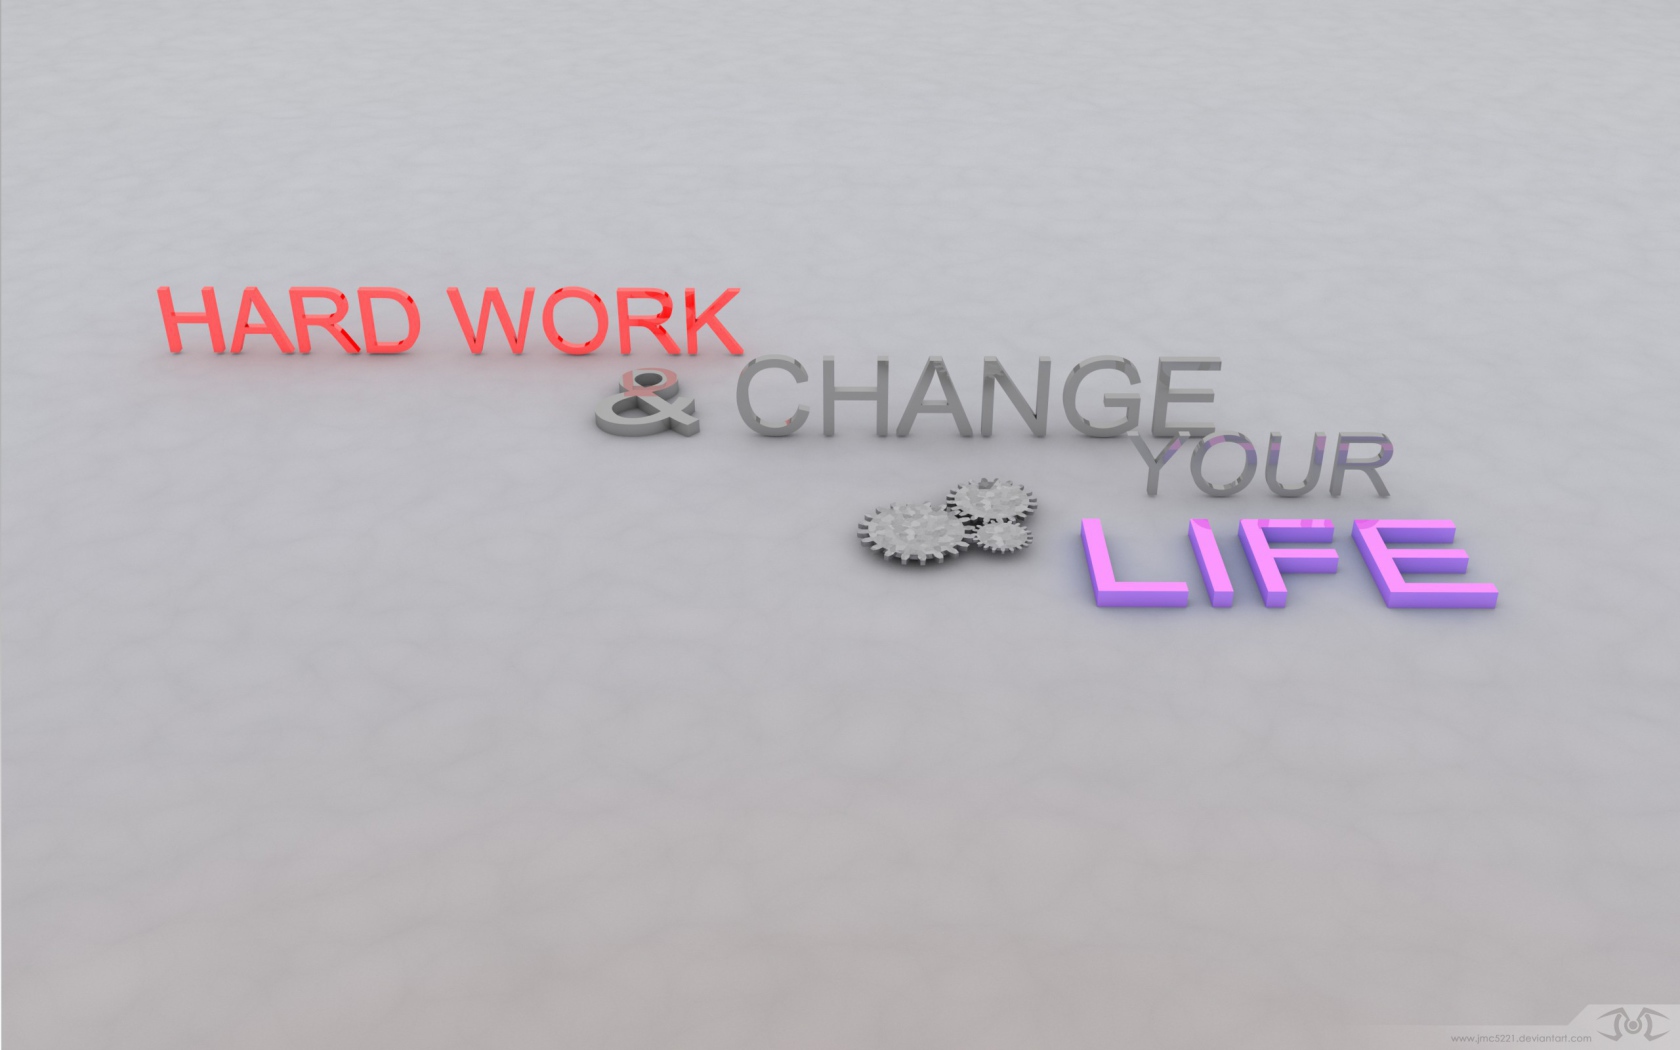 Hard work will change your life